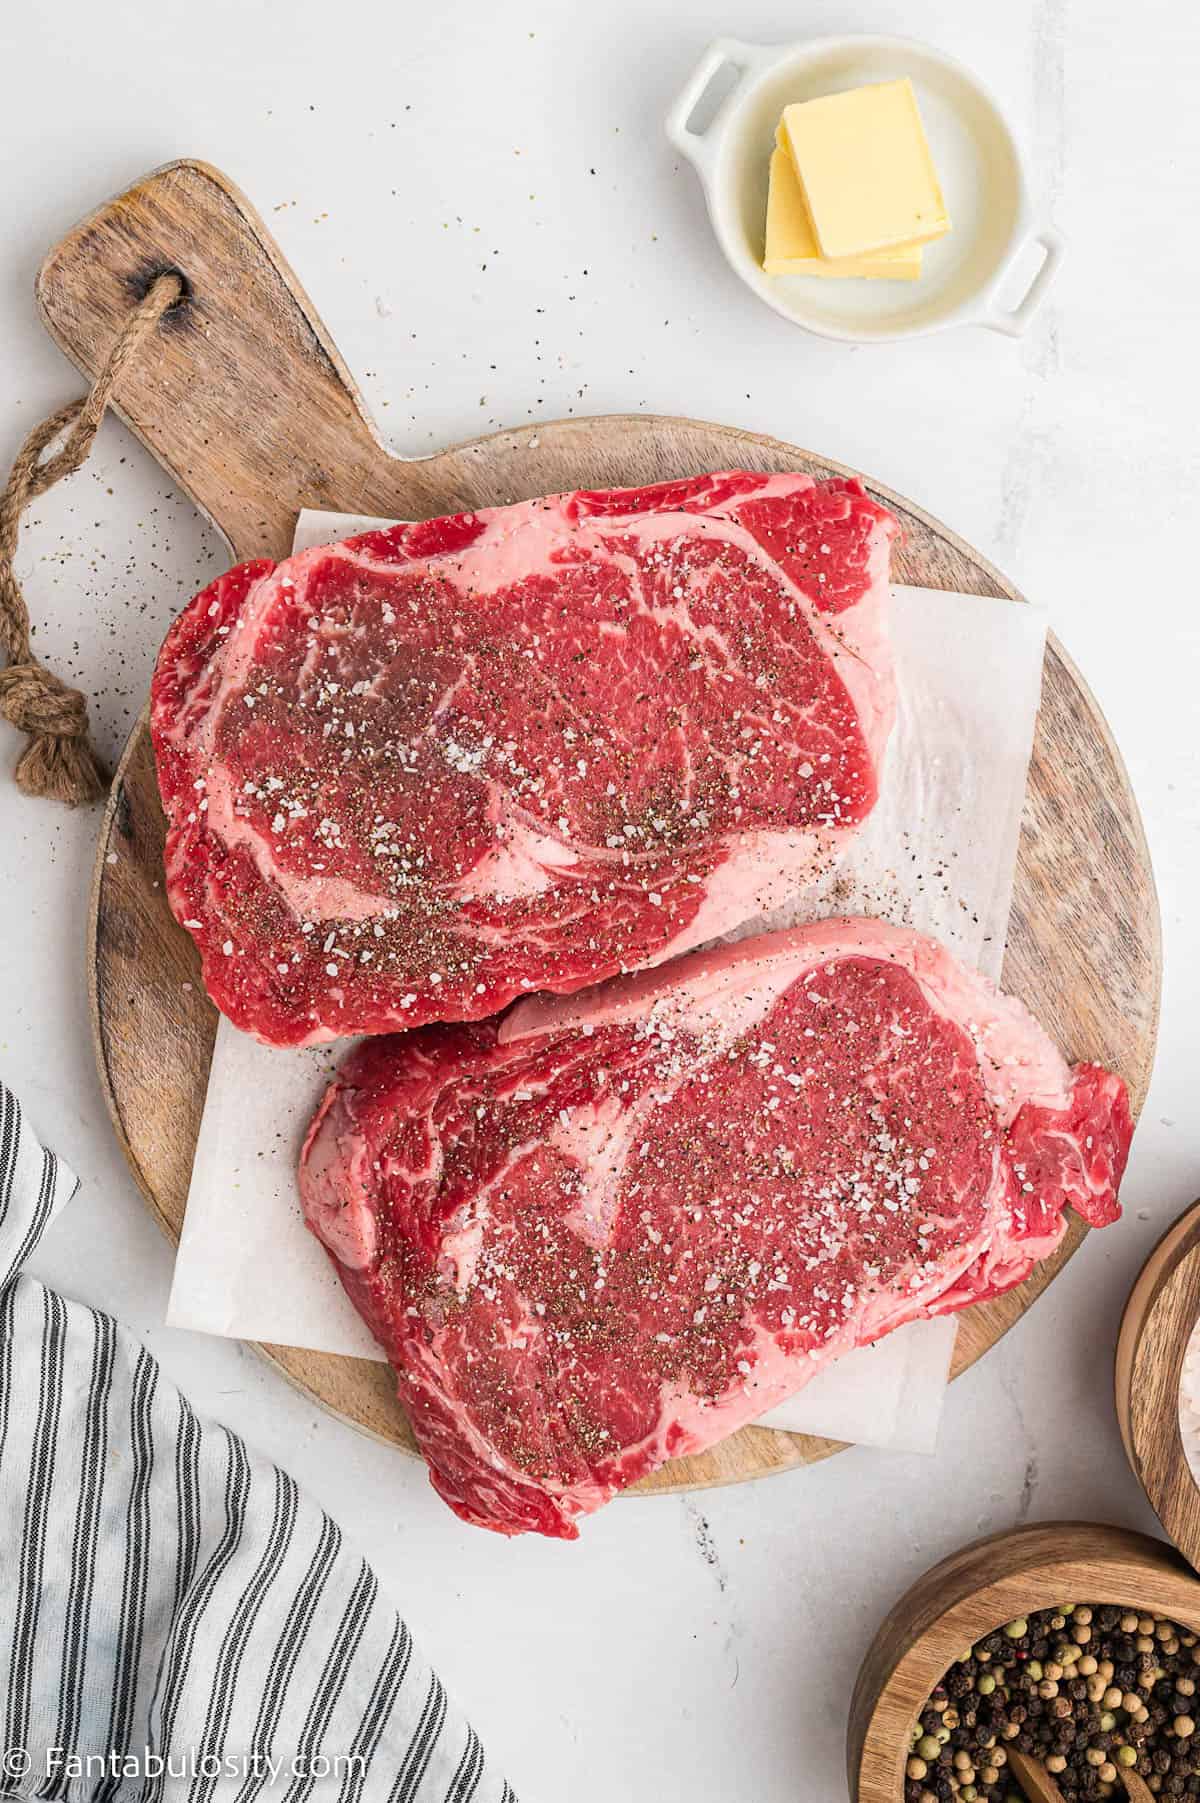 T-bone steak fillets on cutting board with salt and pepper sprinkled on them